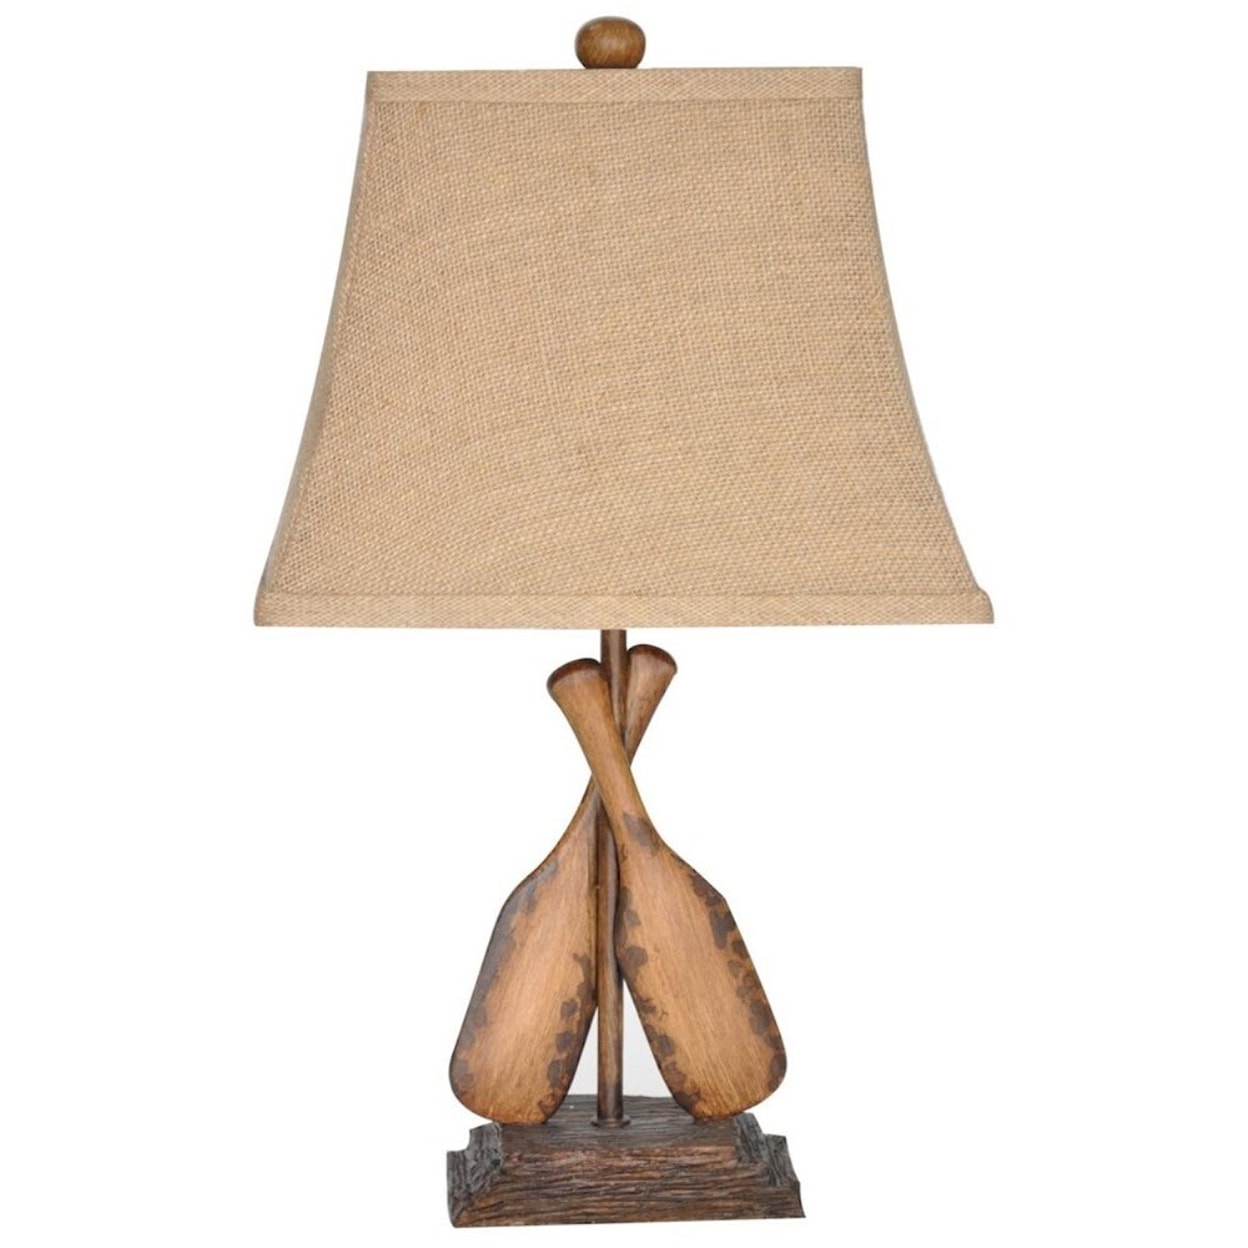 Crestview Collection Lighting Oar Table Lamp